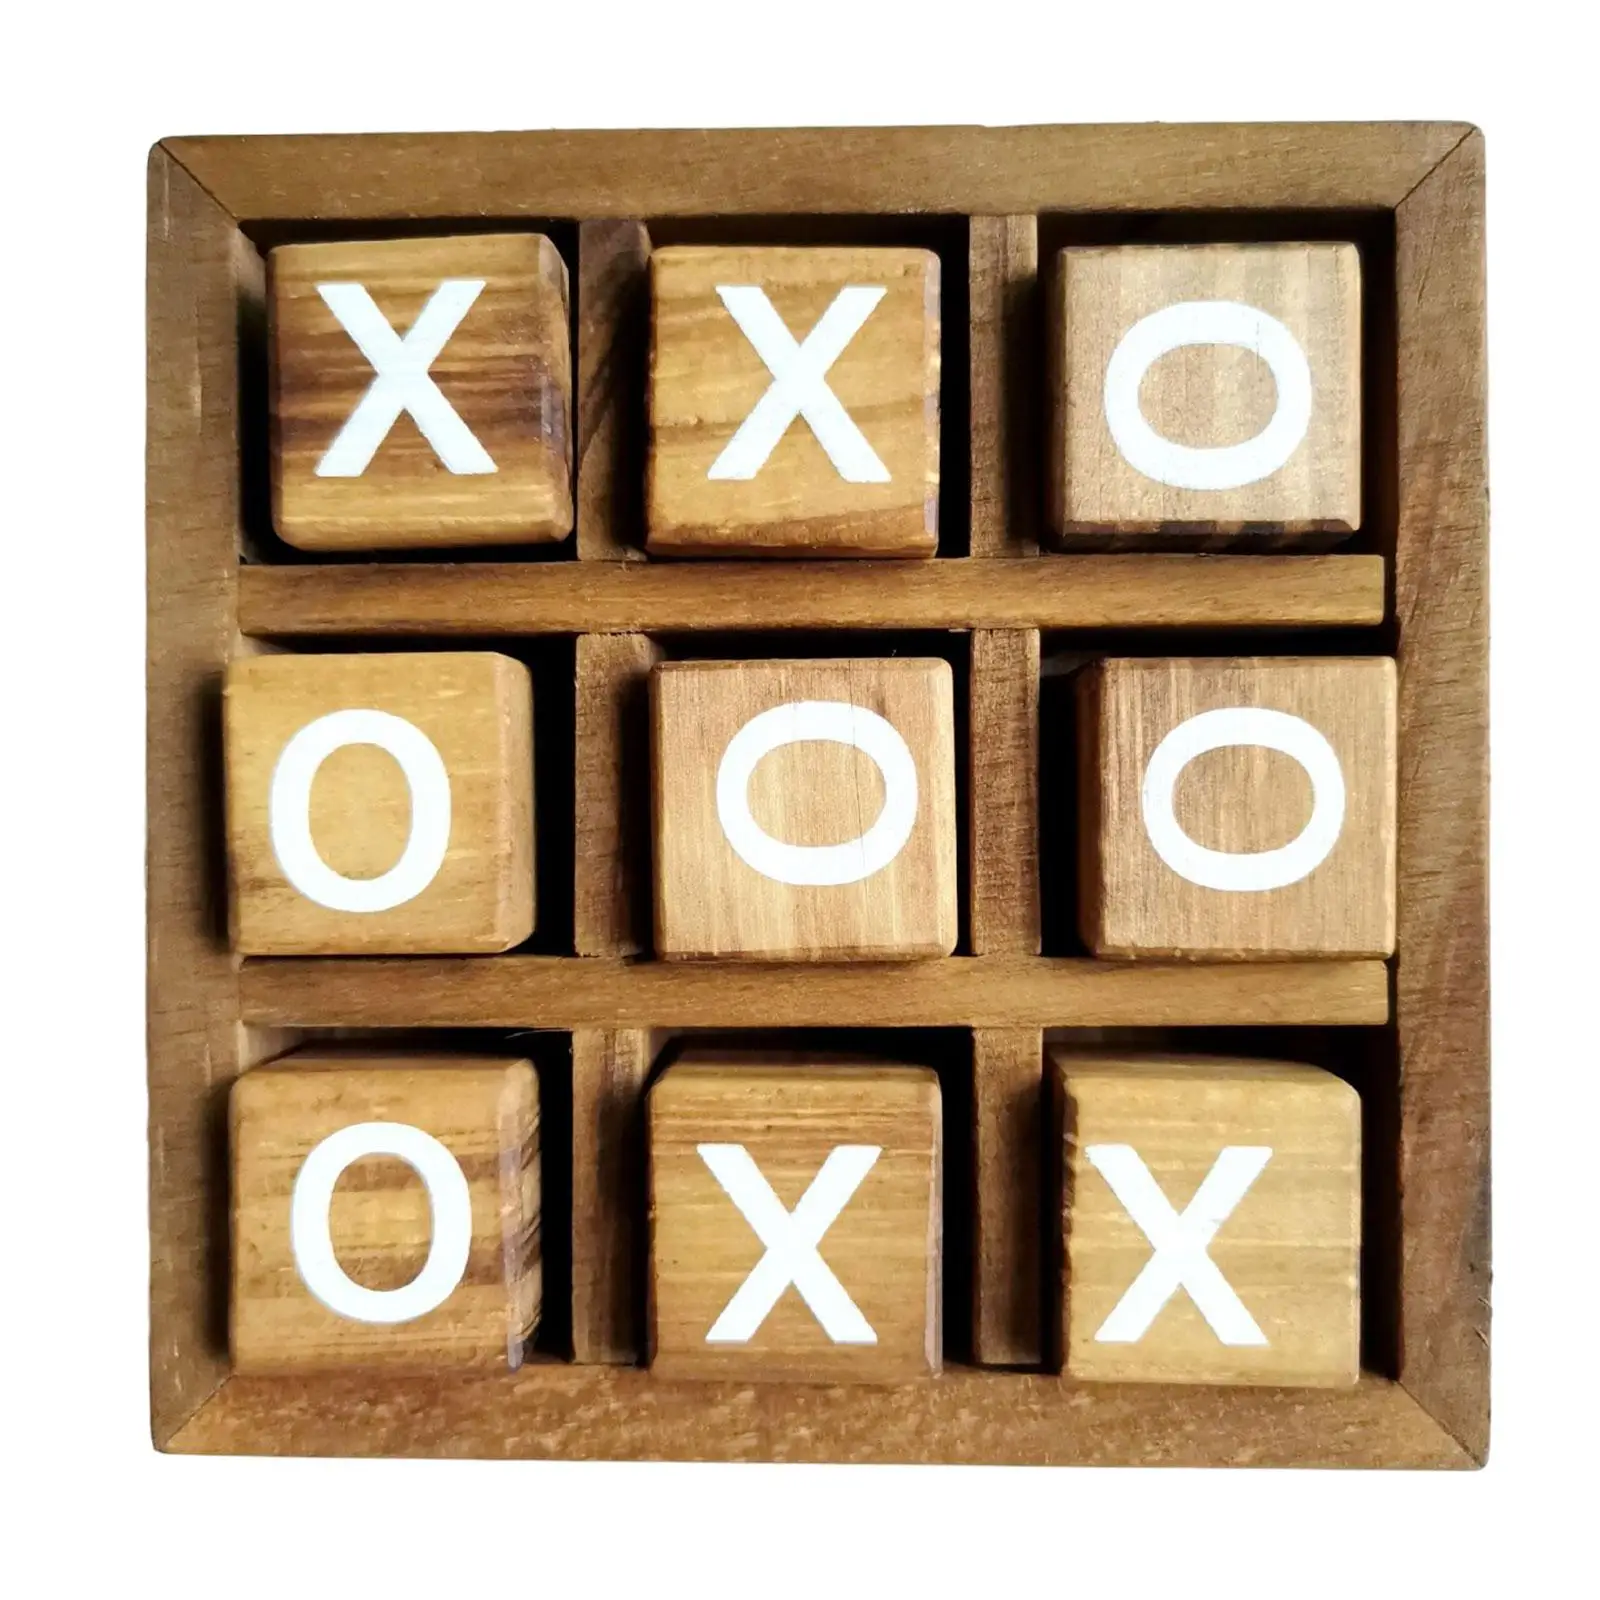 Wooden Tic TAC Toe Game Strategy Board Games Party Favor Fun Indoor Brain Teaser Travel for Home Adults Friends Decor